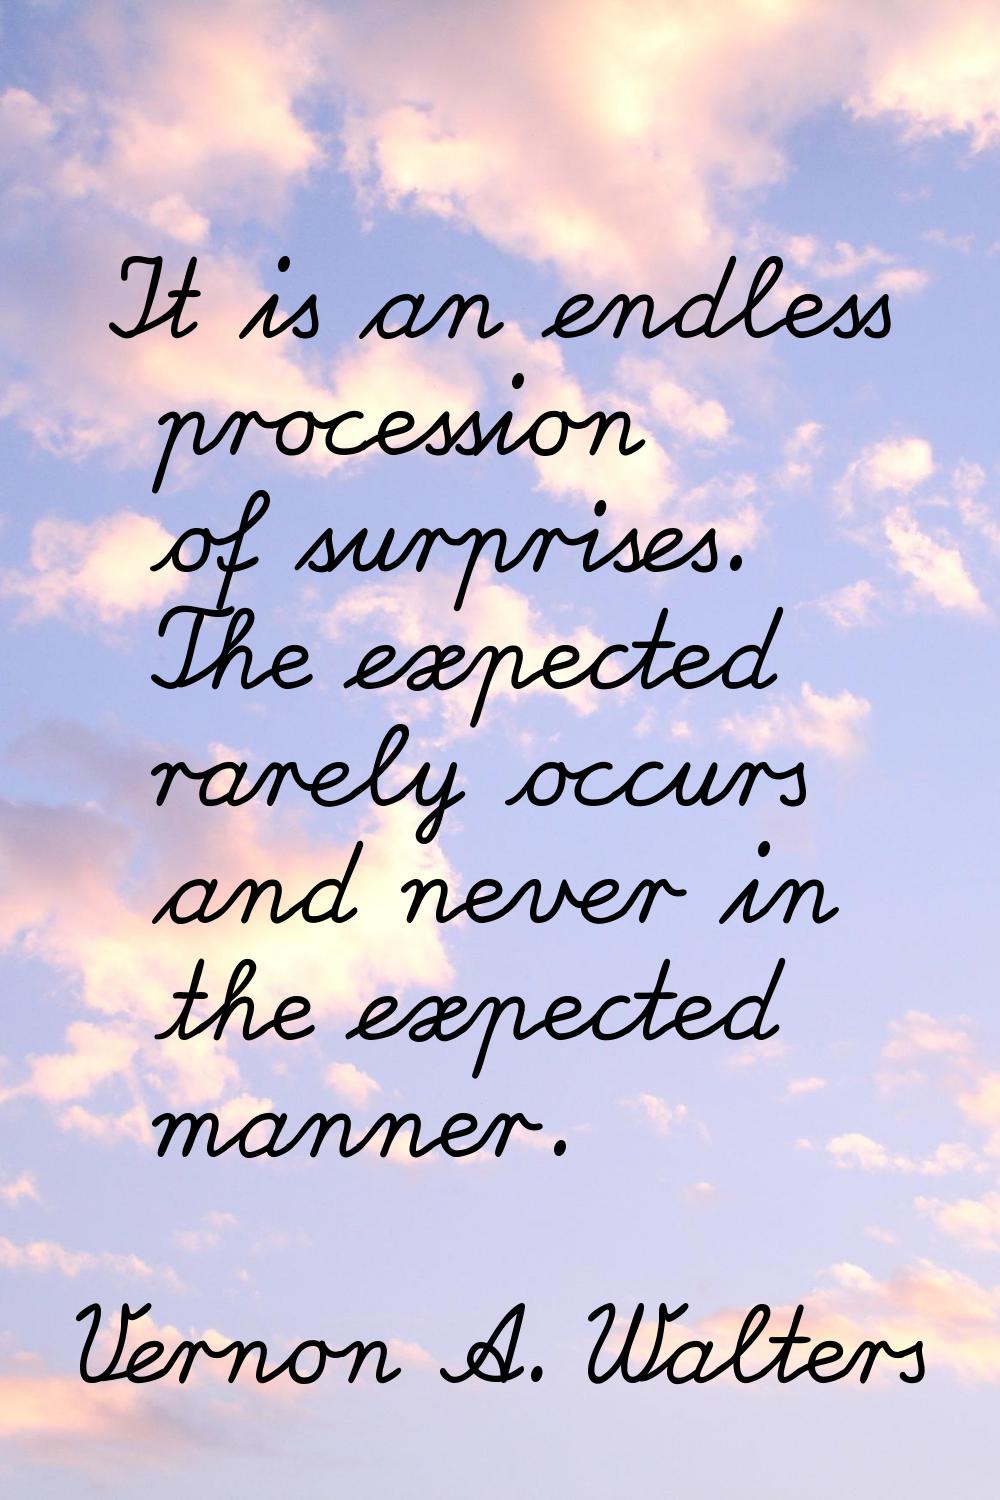 It is an endless procession of surprises. The expected rarely occurs and never in the expected mann